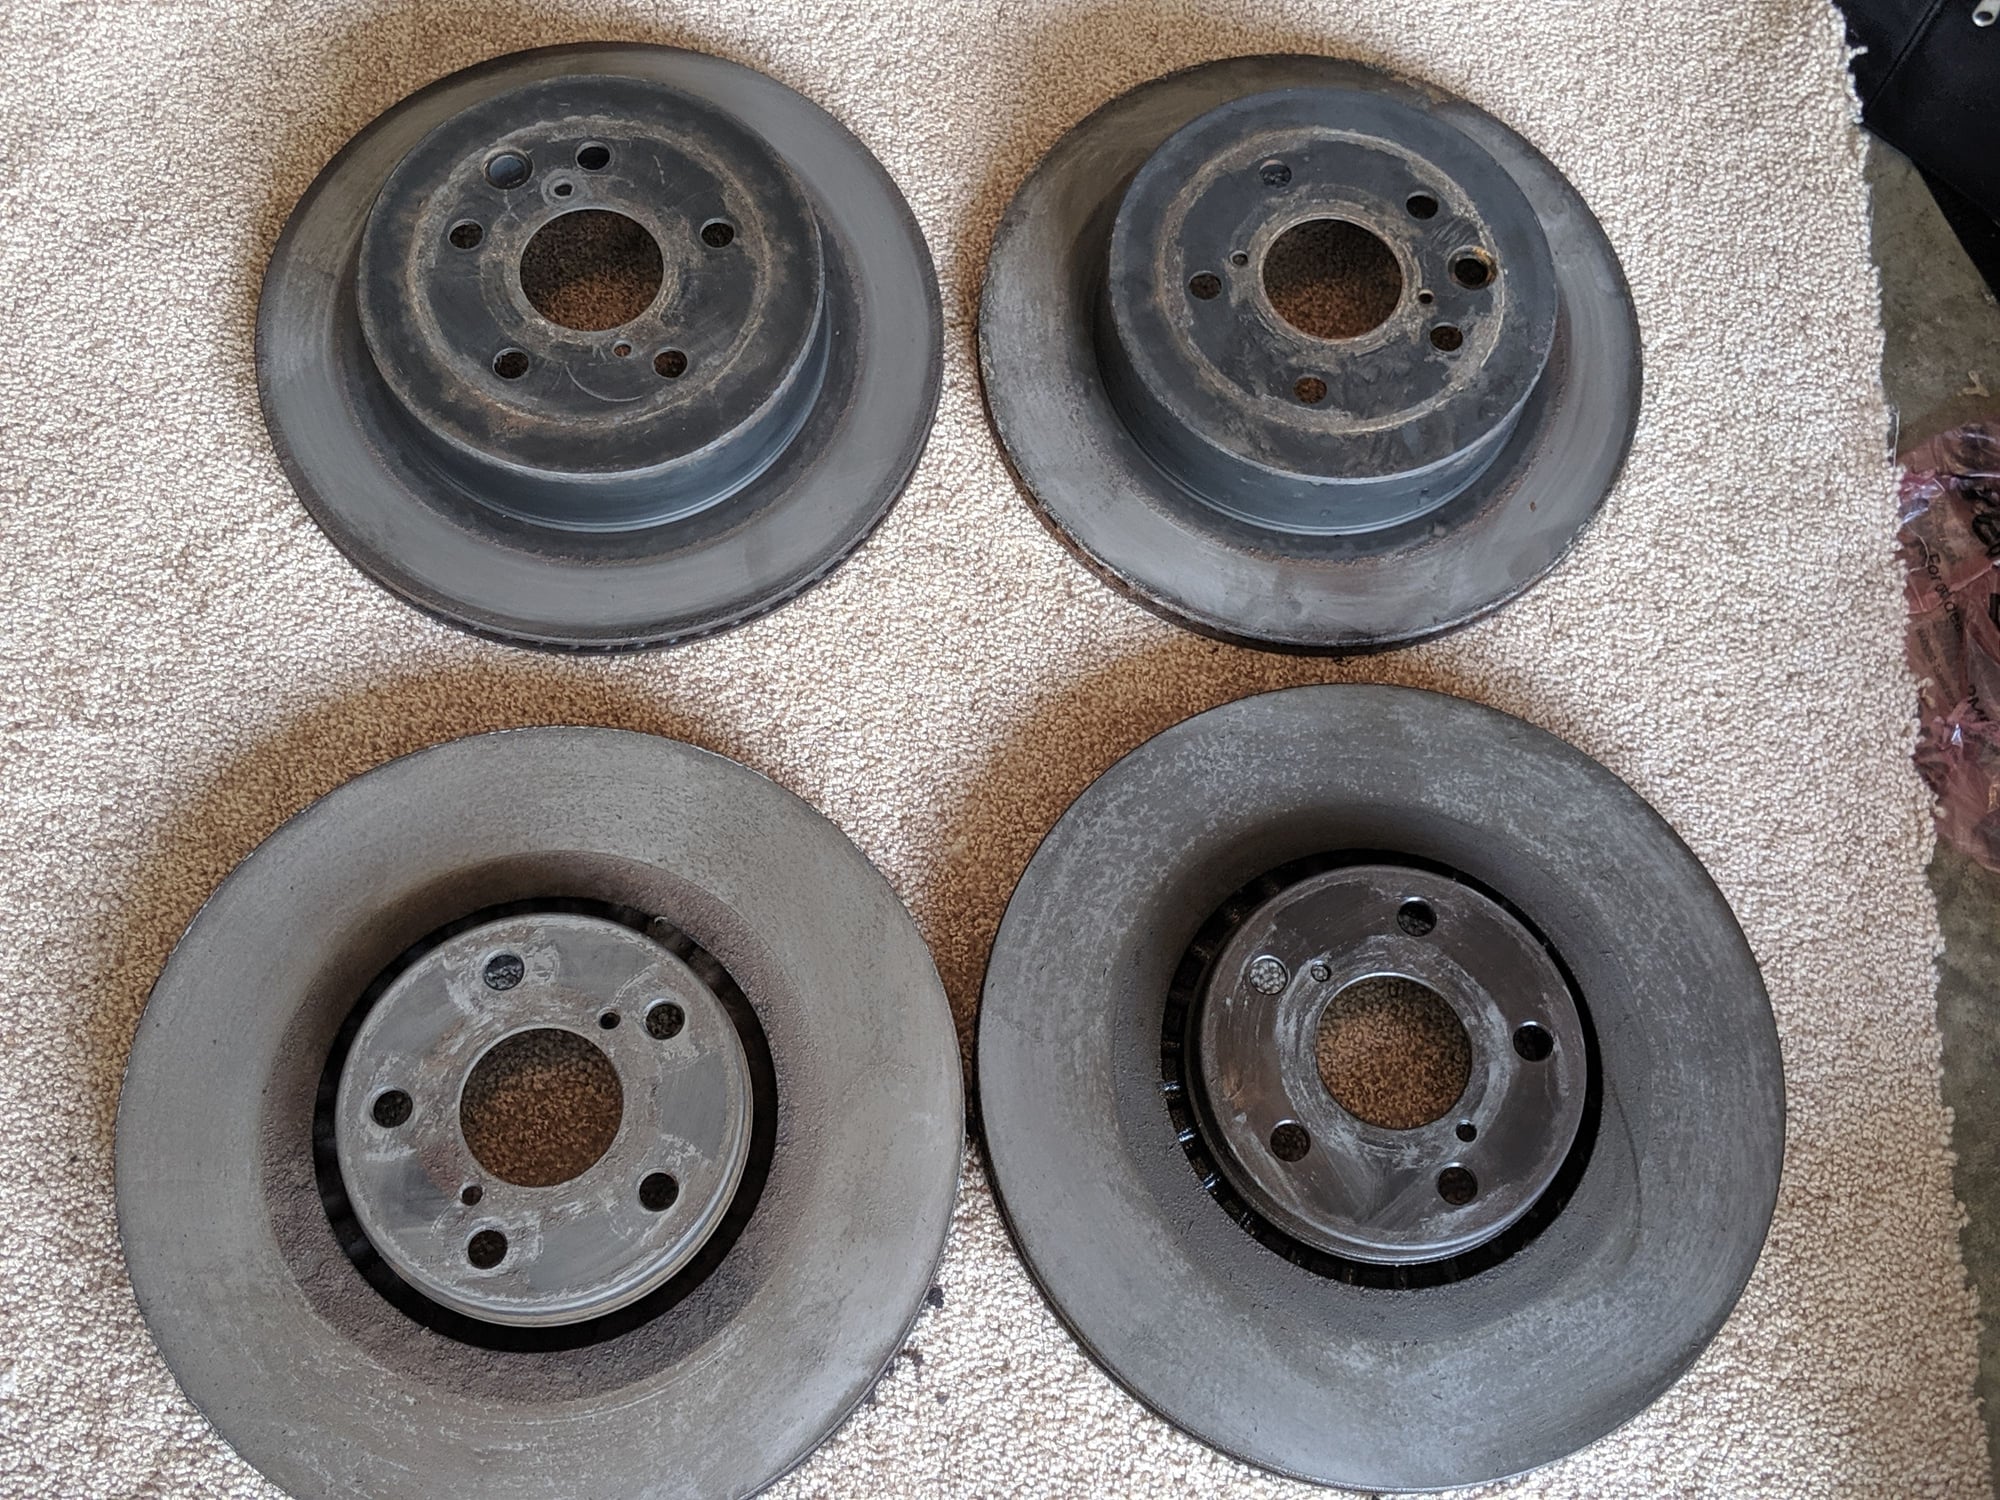 Brakes - IS350 Calipers and Rotors - Used - 2006 to 2013 Lexus IS350 - 2006 to 2013 Lexus IS250 - 2001 to 2005 Lexus IS300 - Mason, OH 45040, United States